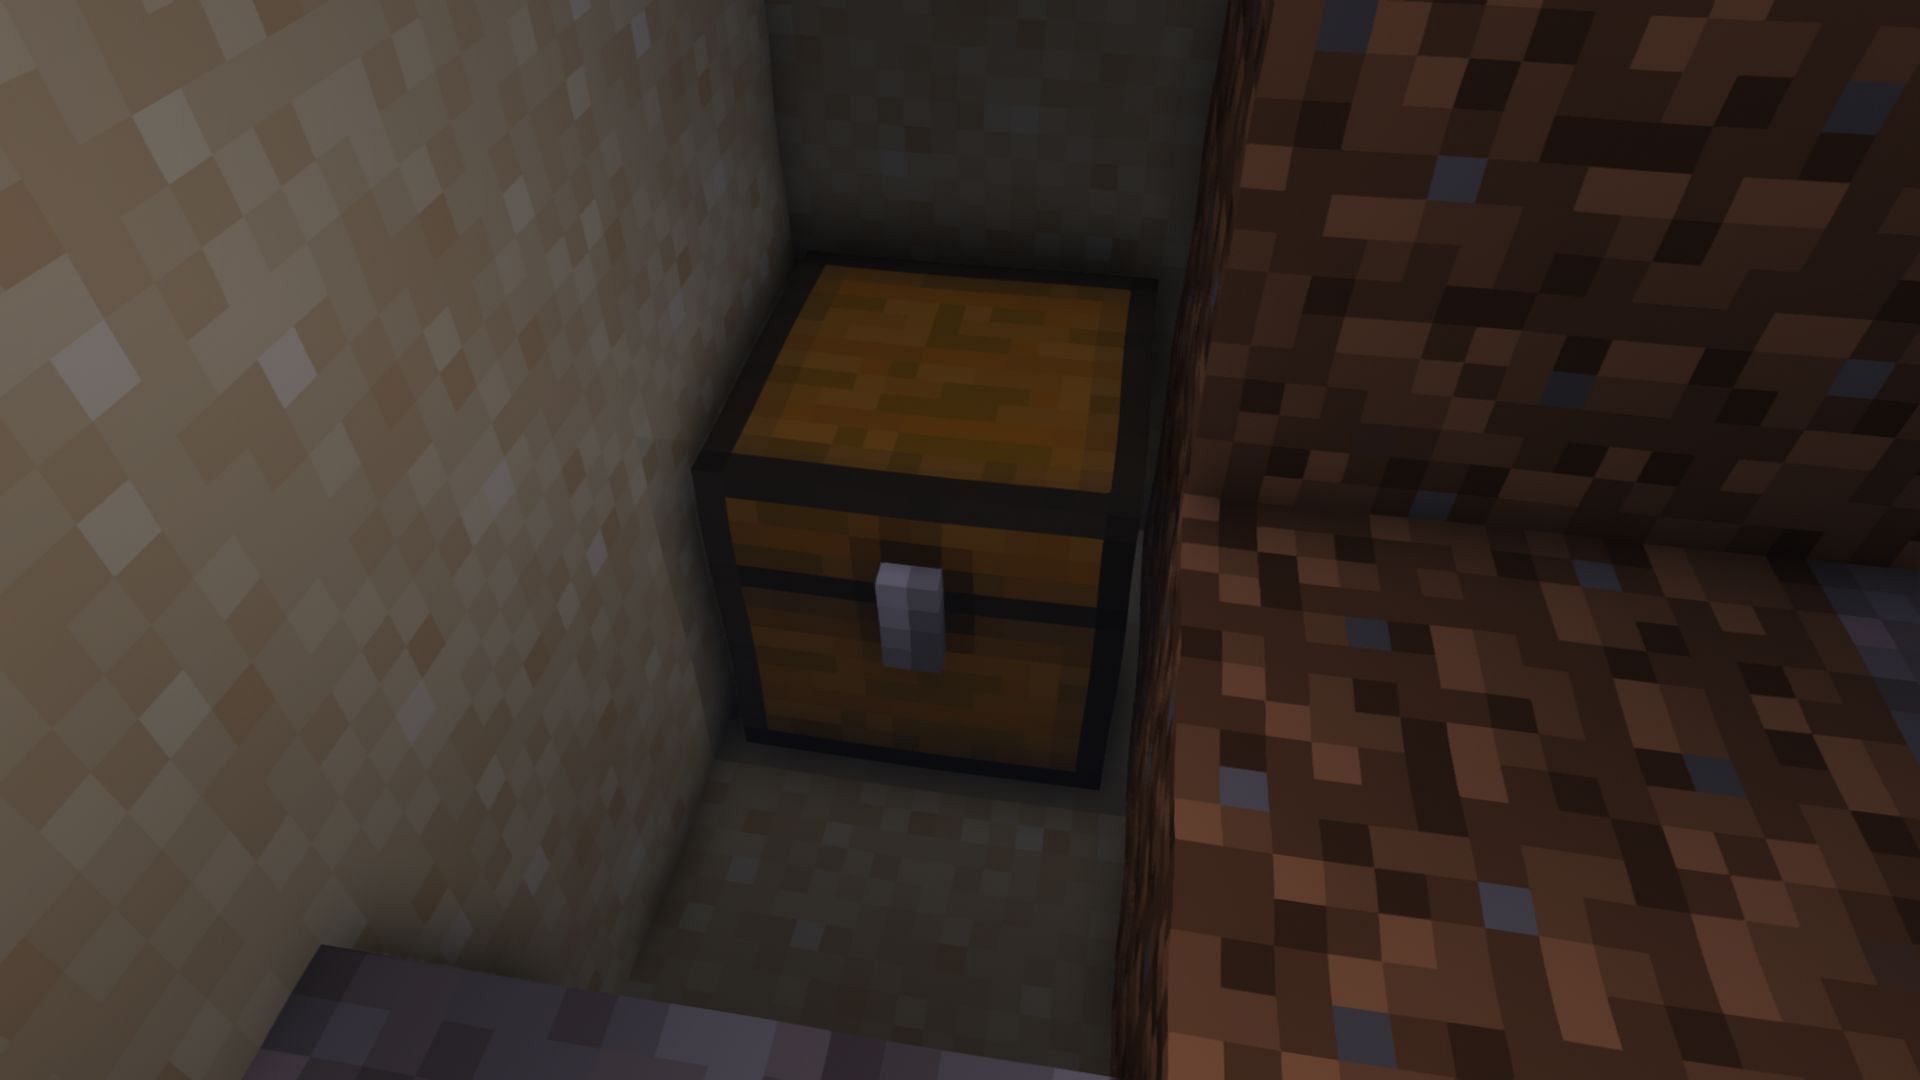 A buried treasure may have music discs (Image via Minecraft)